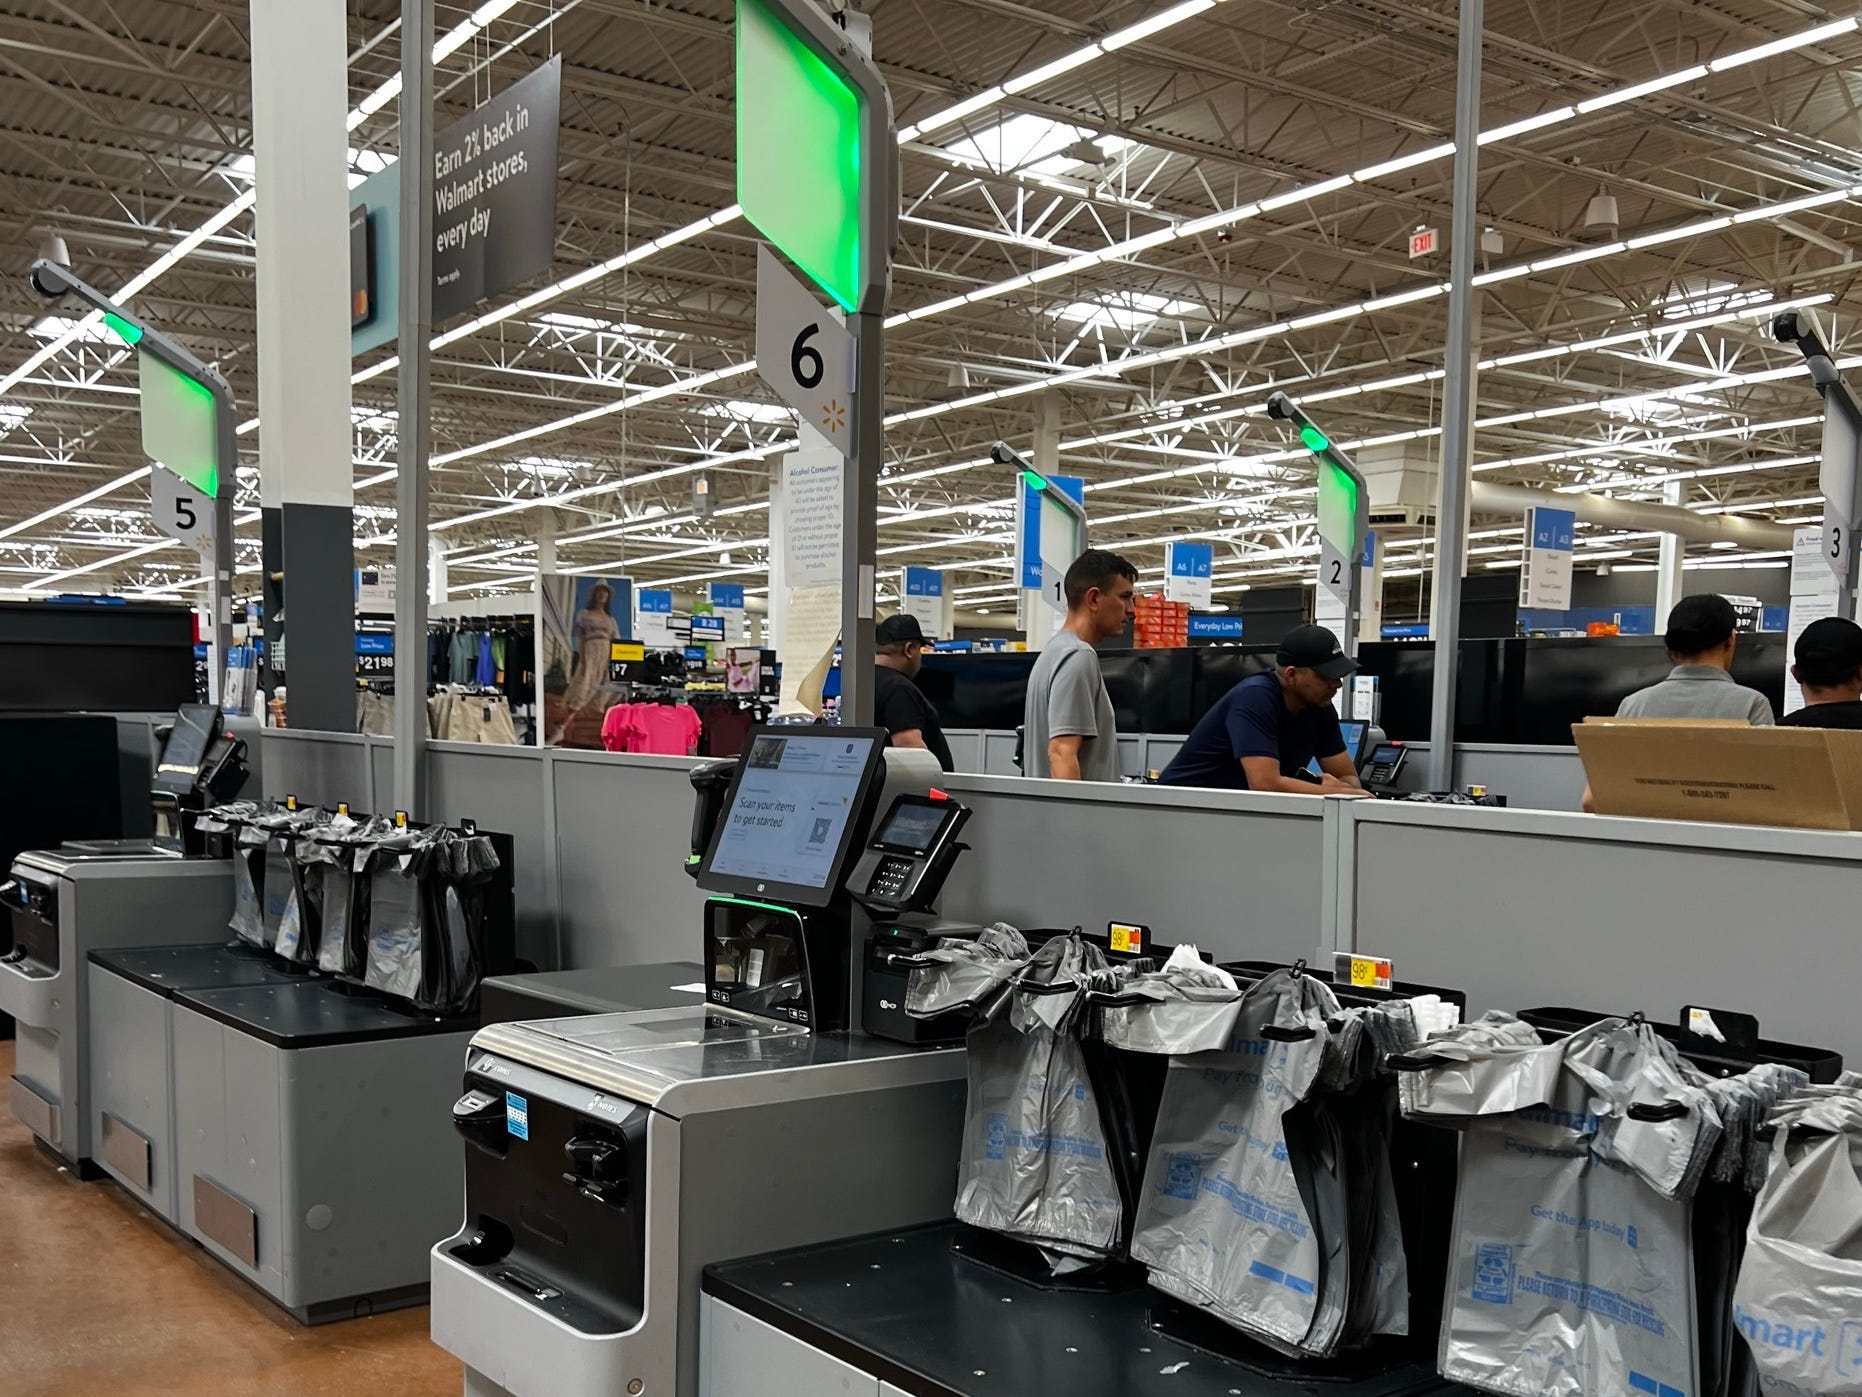 microsoft, california may restrict self-checkouts in an attempt to curb shoplifting